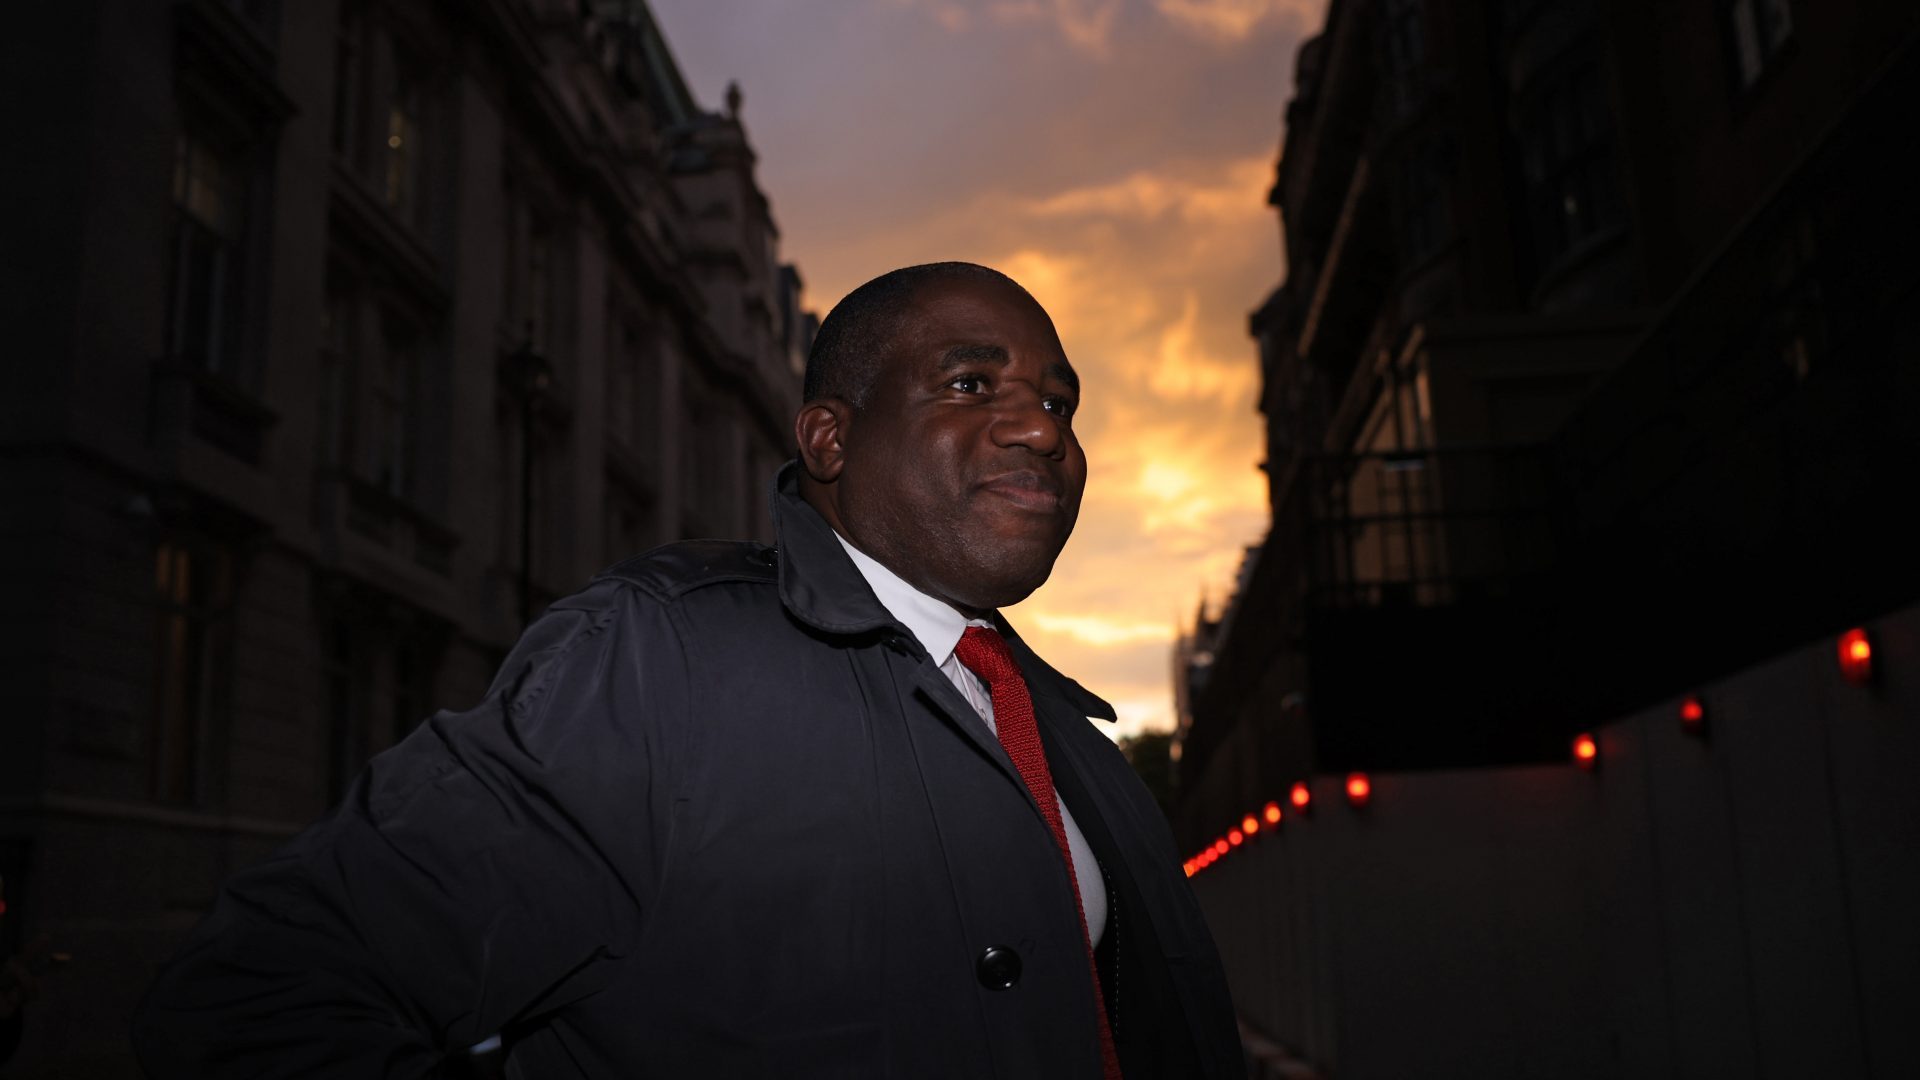 Shadow Foreign Secretary David Lammy leaves Millbank studios, following the resignation of Liz Truss as Prime Minister Of The United Kingdom, on October 20, 2022 in London, England. Photo: Dan Kitwood/Getty Images